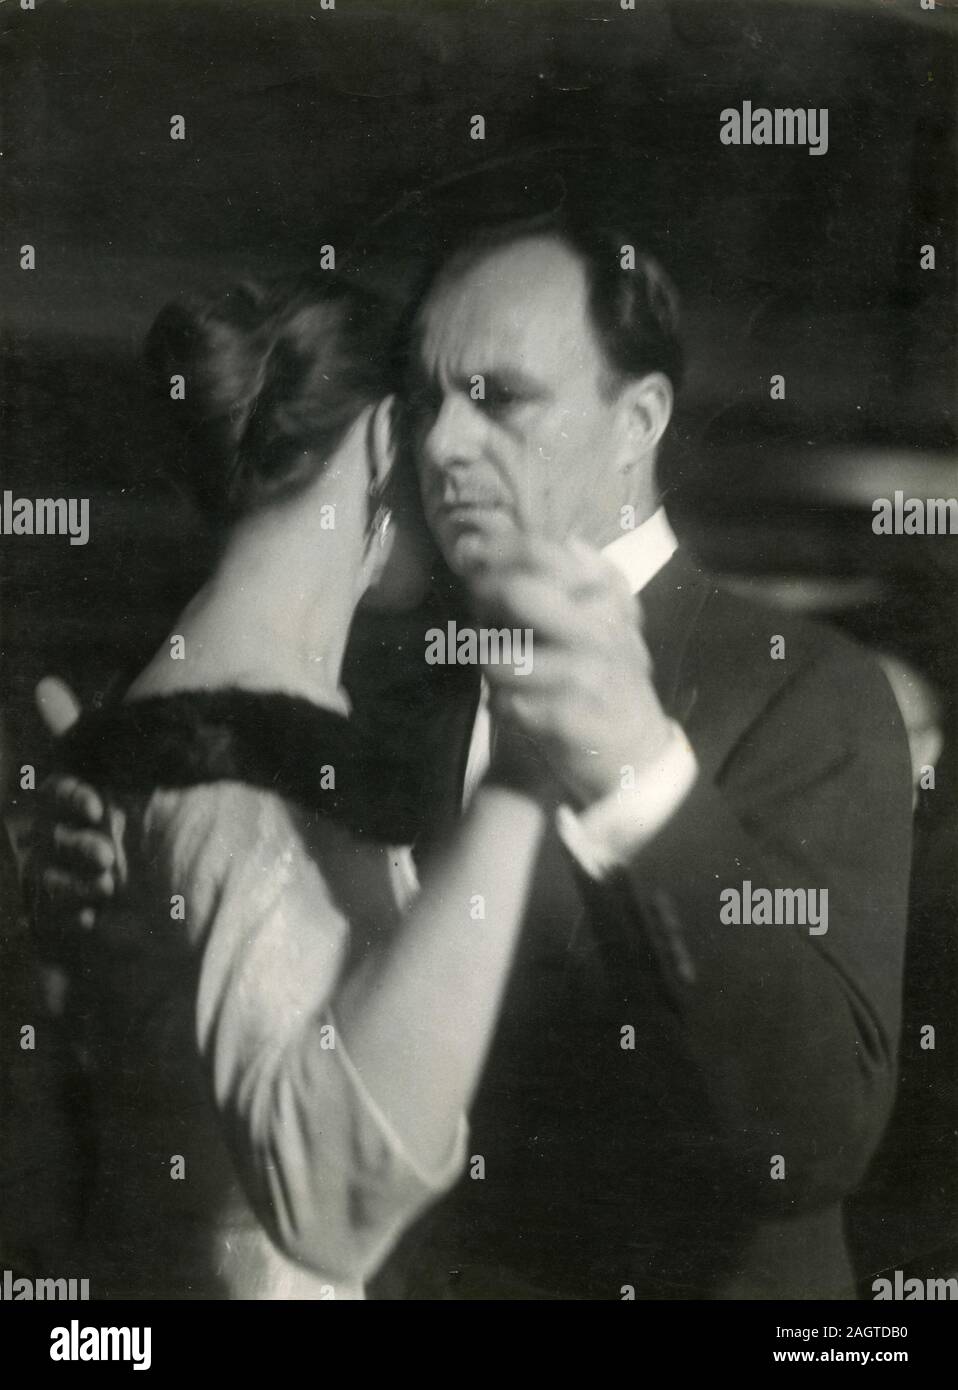 Prince Aly Khan dancing with his girlfriend Bettina Graziani, French model, 1960s Stock Photo